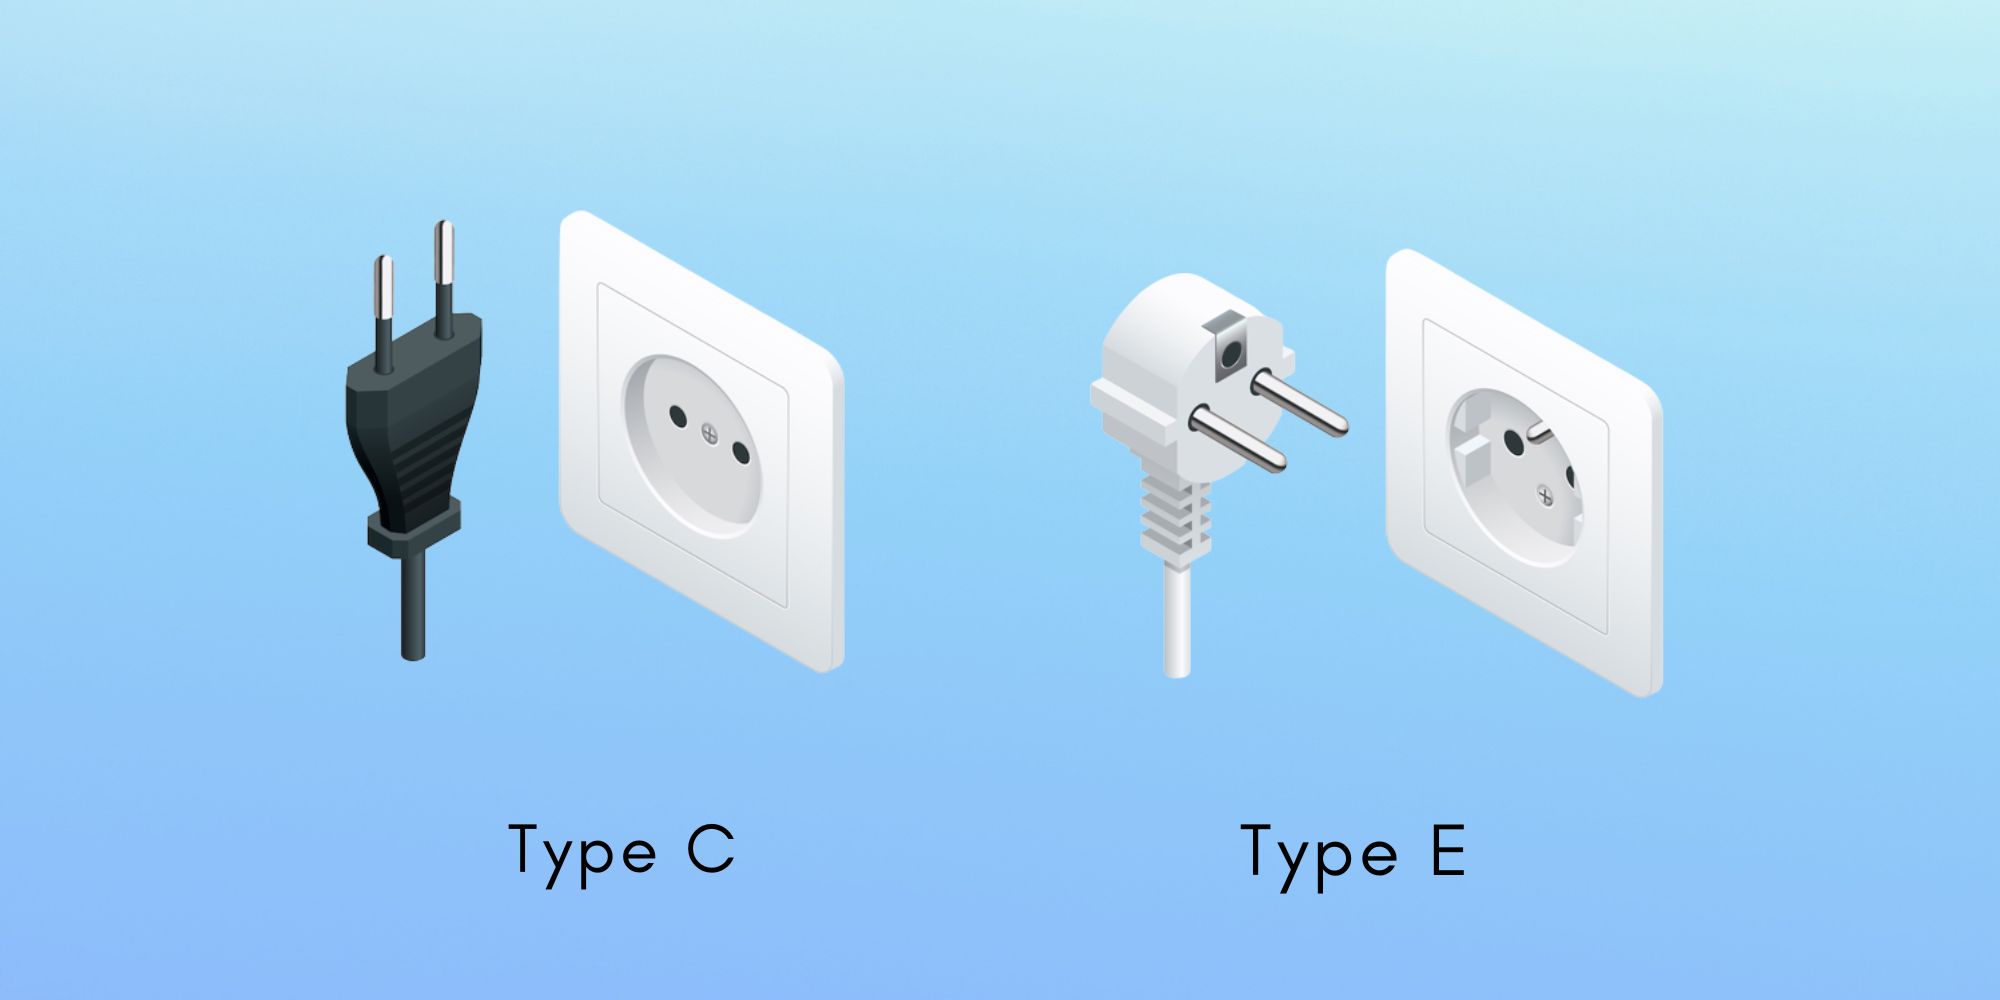 Saint Martin Power Plugs and Sockets: Type C and Type E
